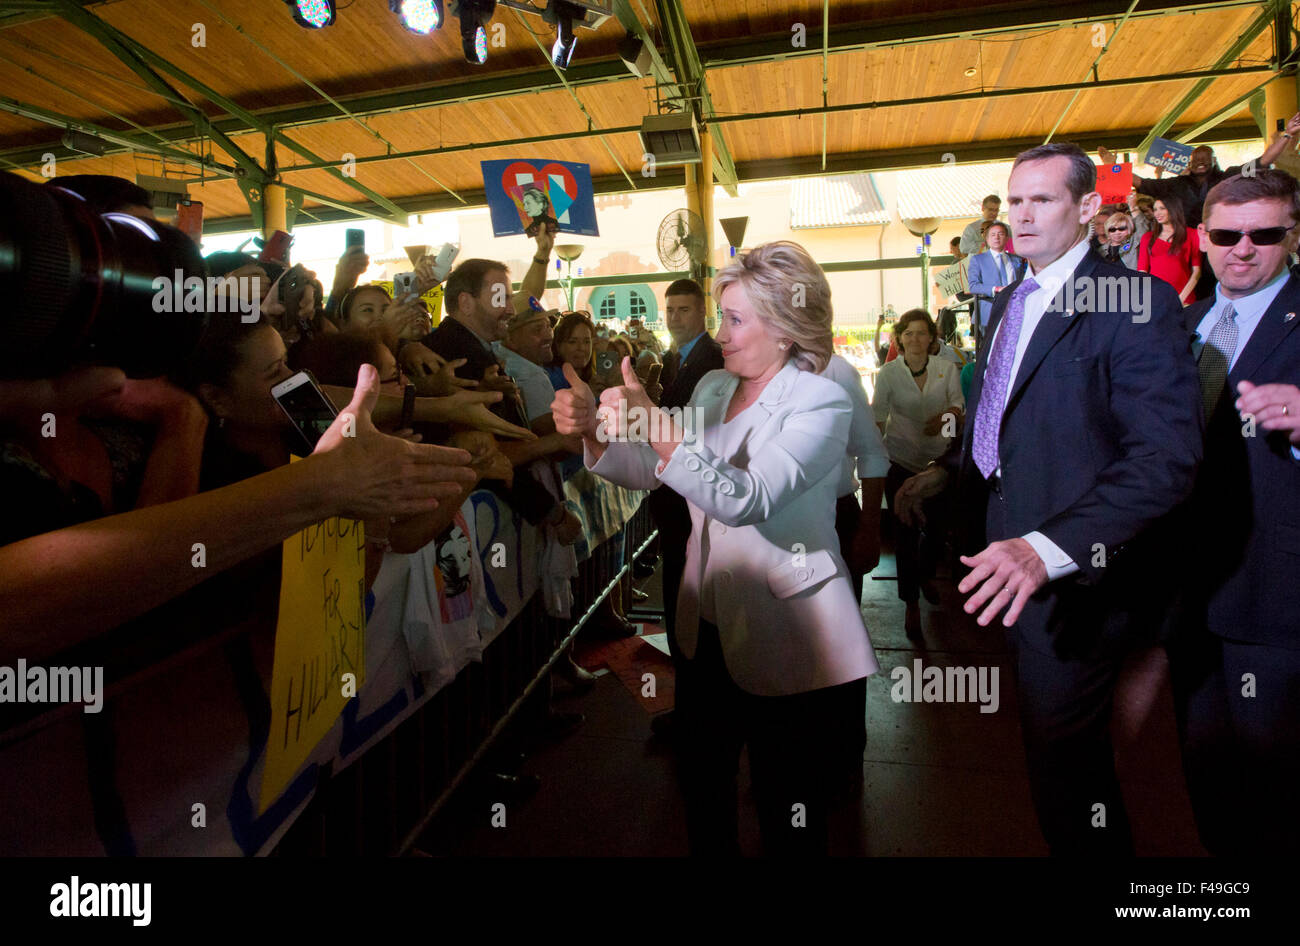 US Democratic presidential hopeful Hillary Clinton greets supporters during a campaign stop in Texas Stock Photo